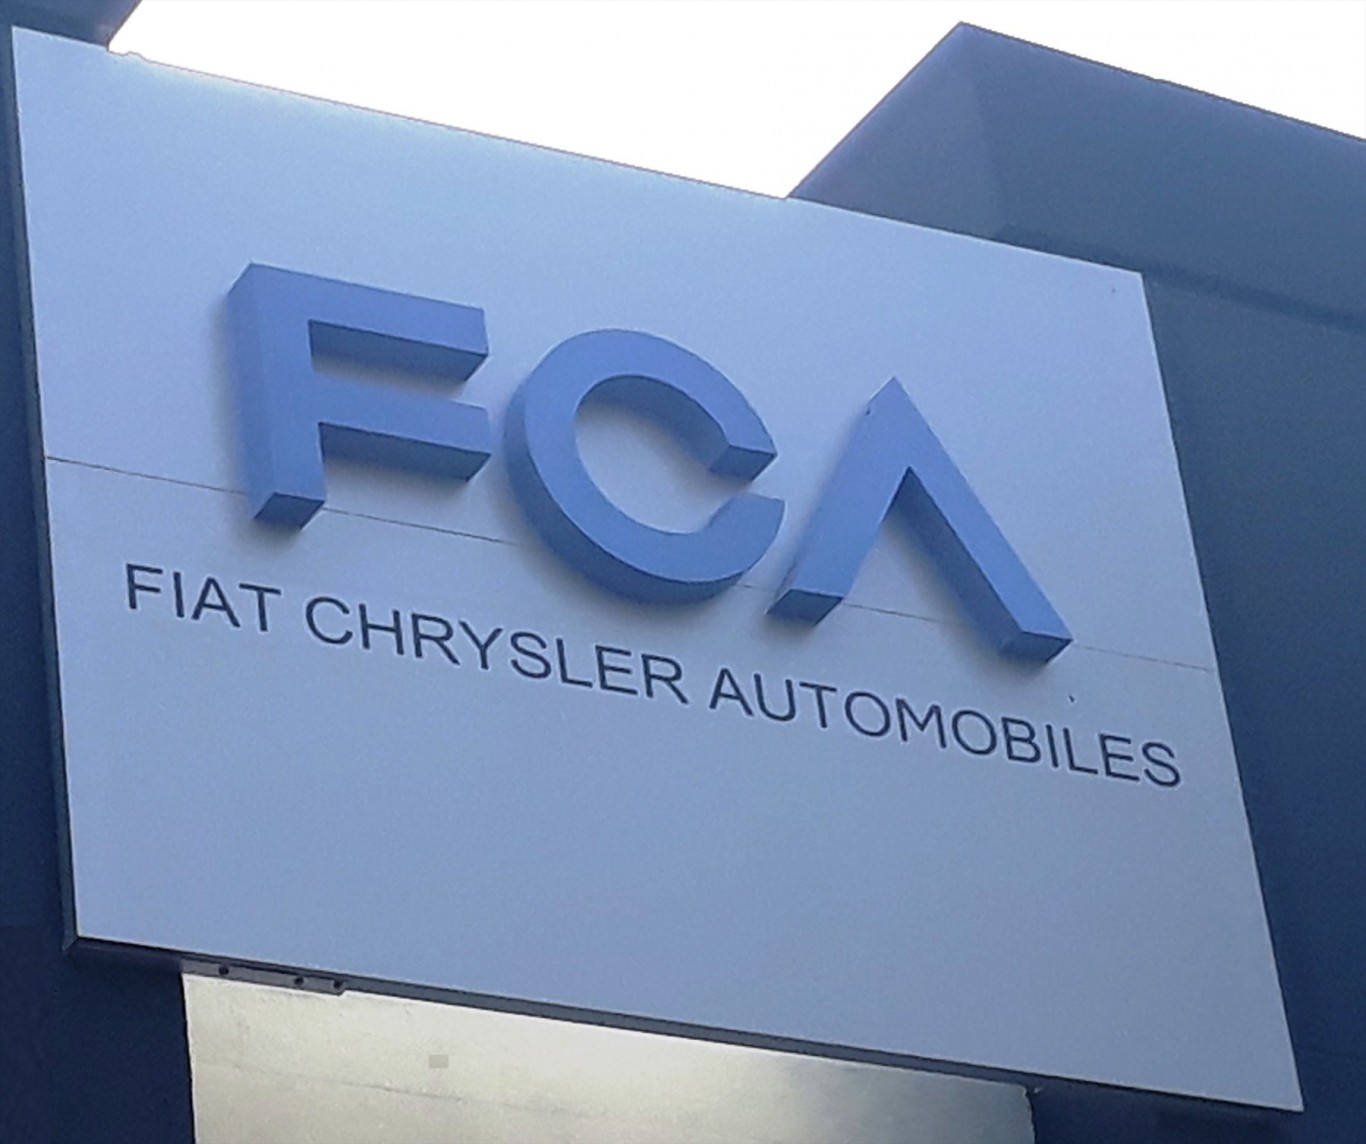 Fiat Chrysler Automobiles South Africa Becomes One